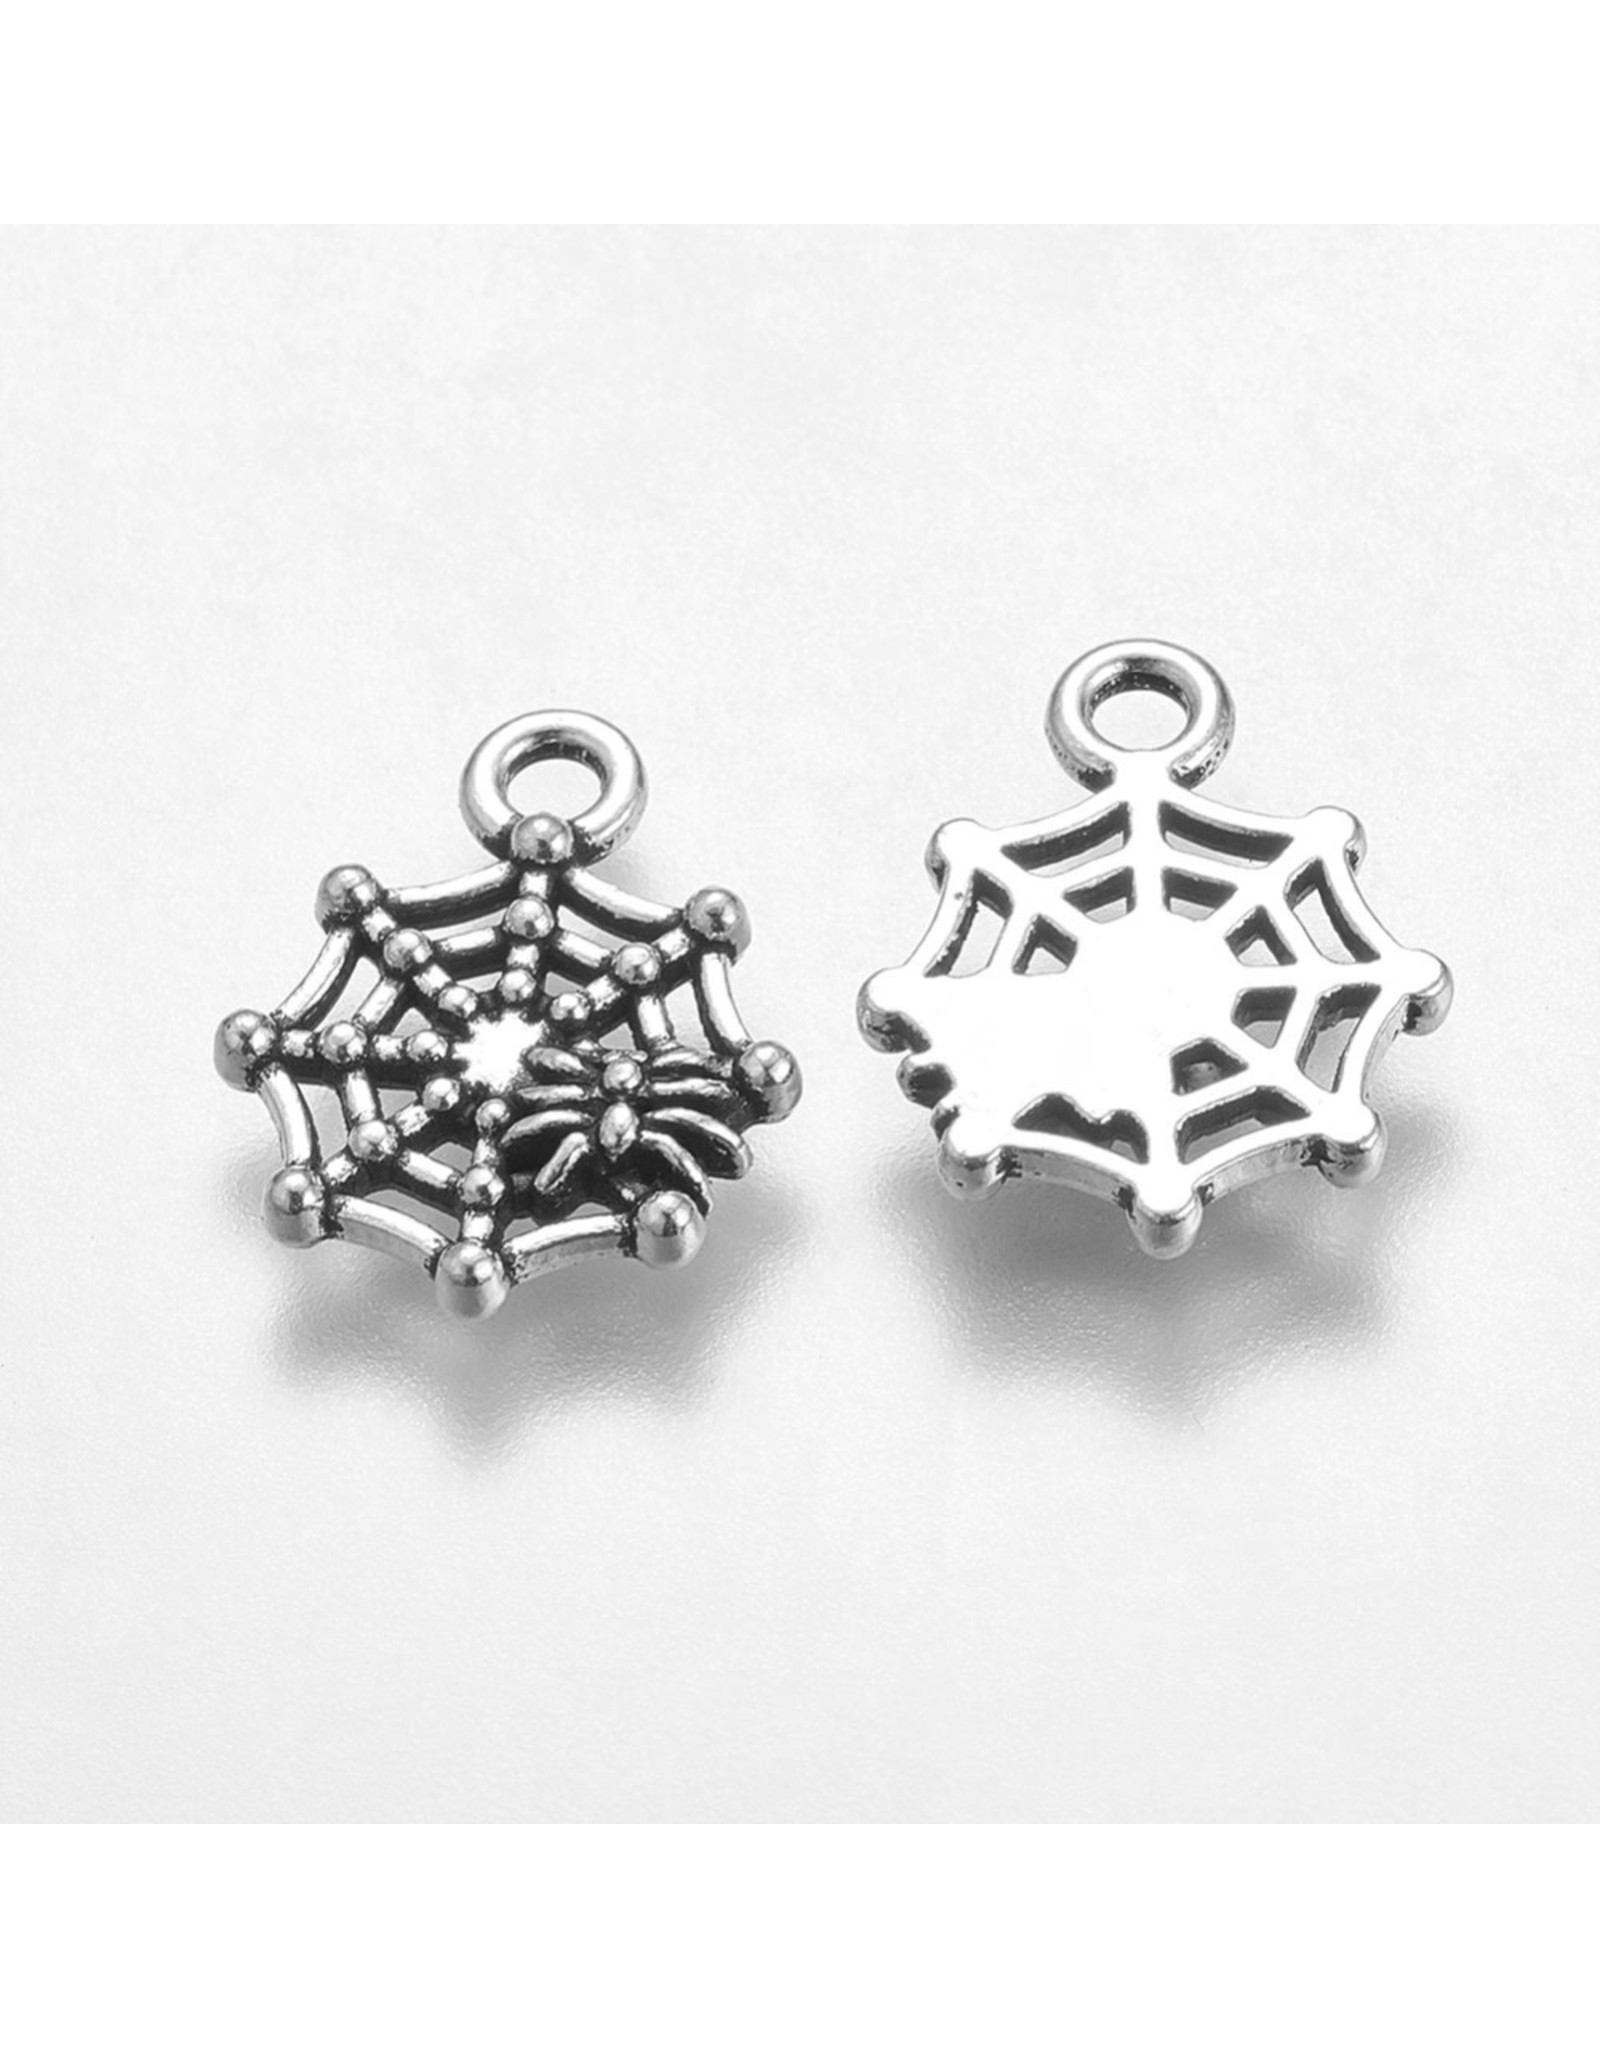 Spider and Web  17x14mm  Antique Silver   x50  NF